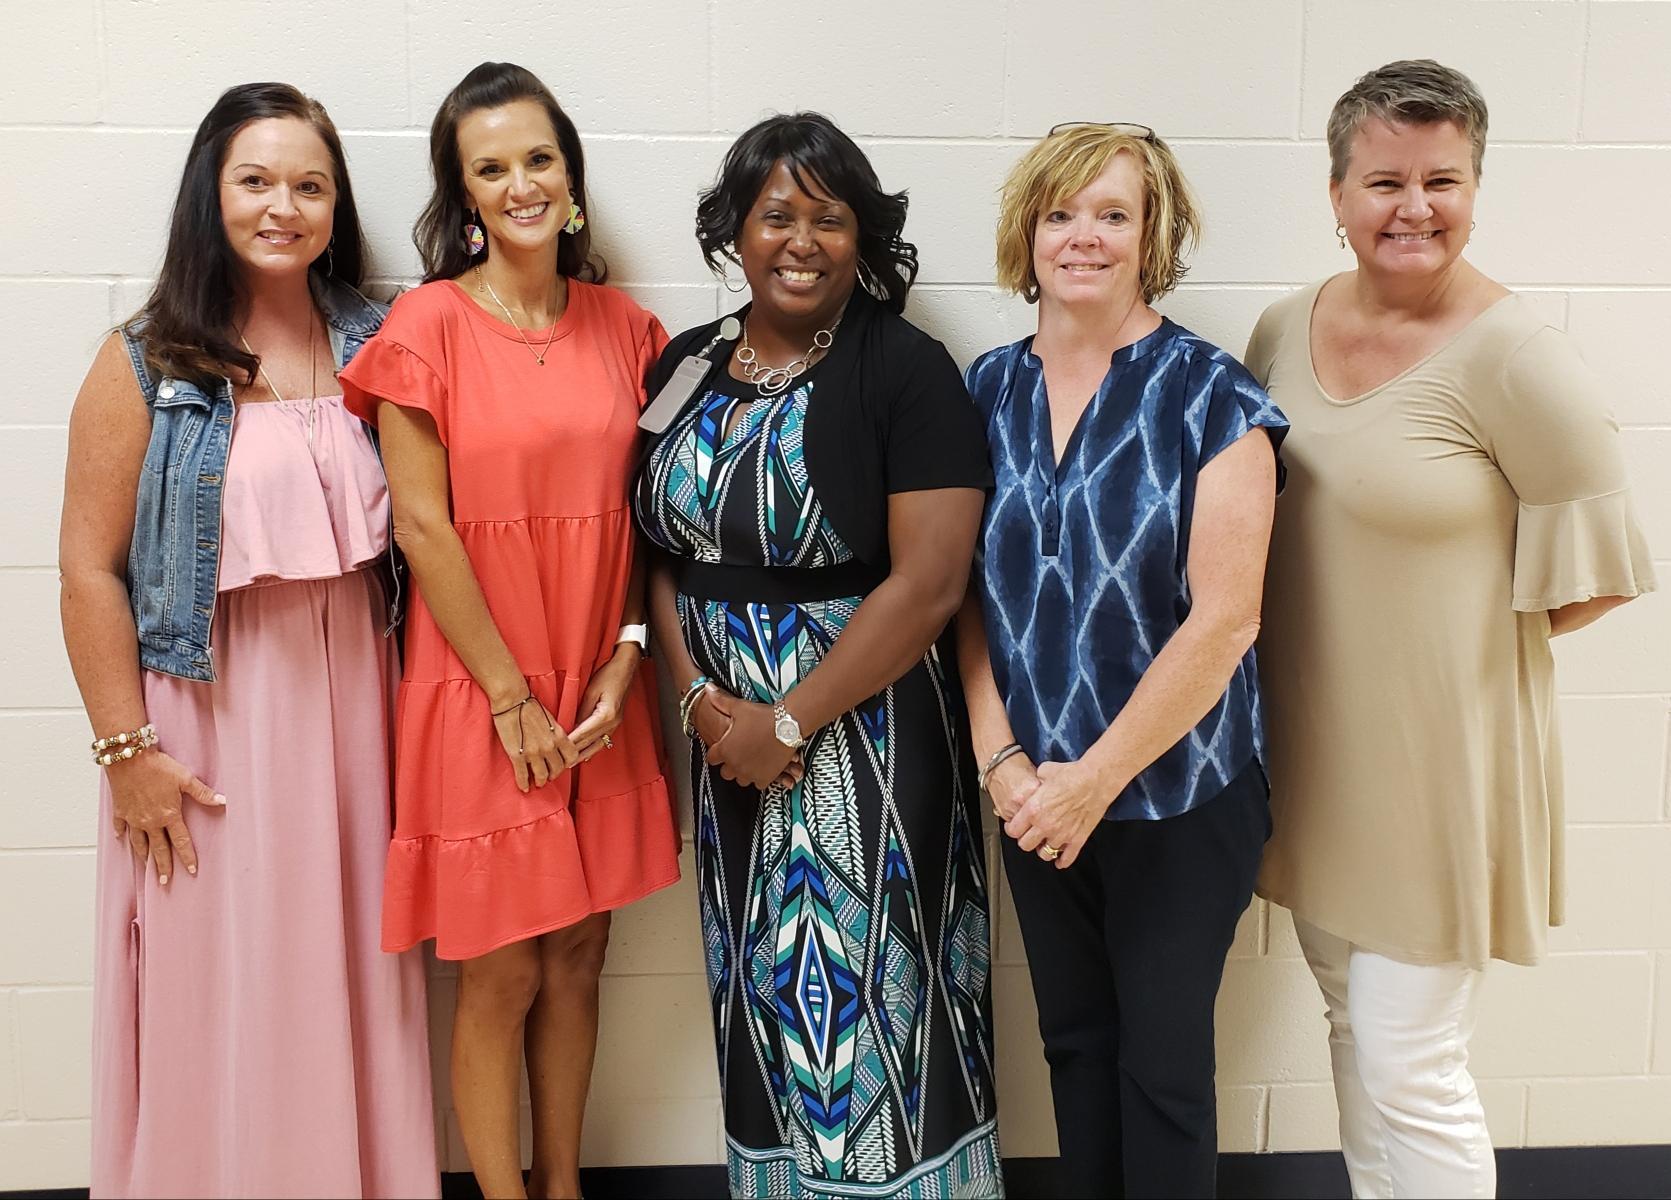 Ms. Brie, Ms. Register, Ms. Lucas, Ms. Gattis, Ms. John standing in the hallway for a group photo